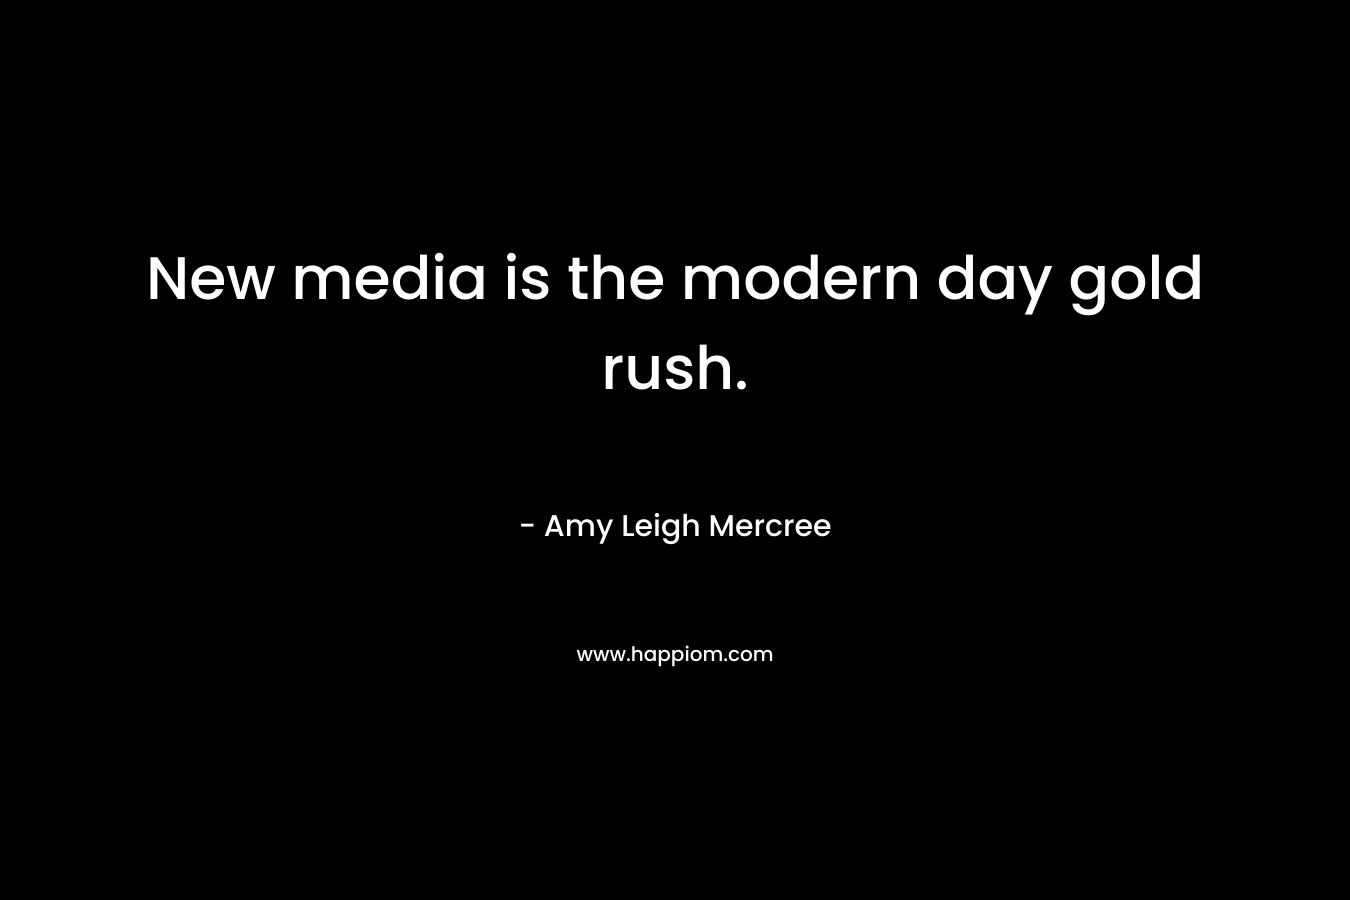 New media is the modern day gold rush. – Amy Leigh Mercree